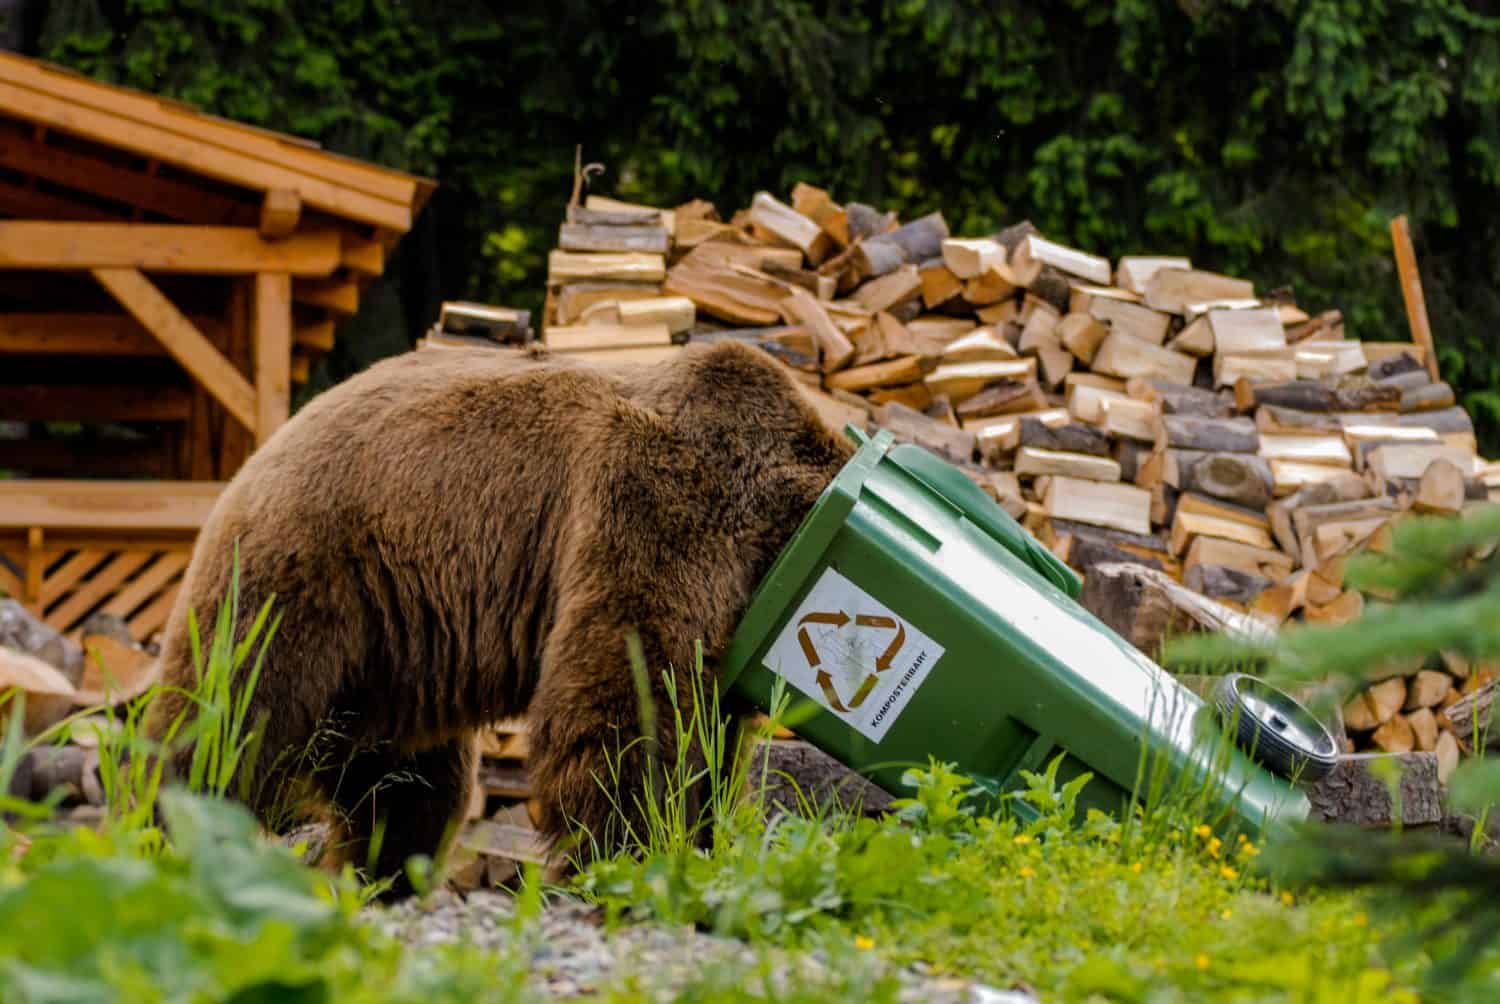 Brown bear looking into trash bin with sigh compost able (Komposterbart)